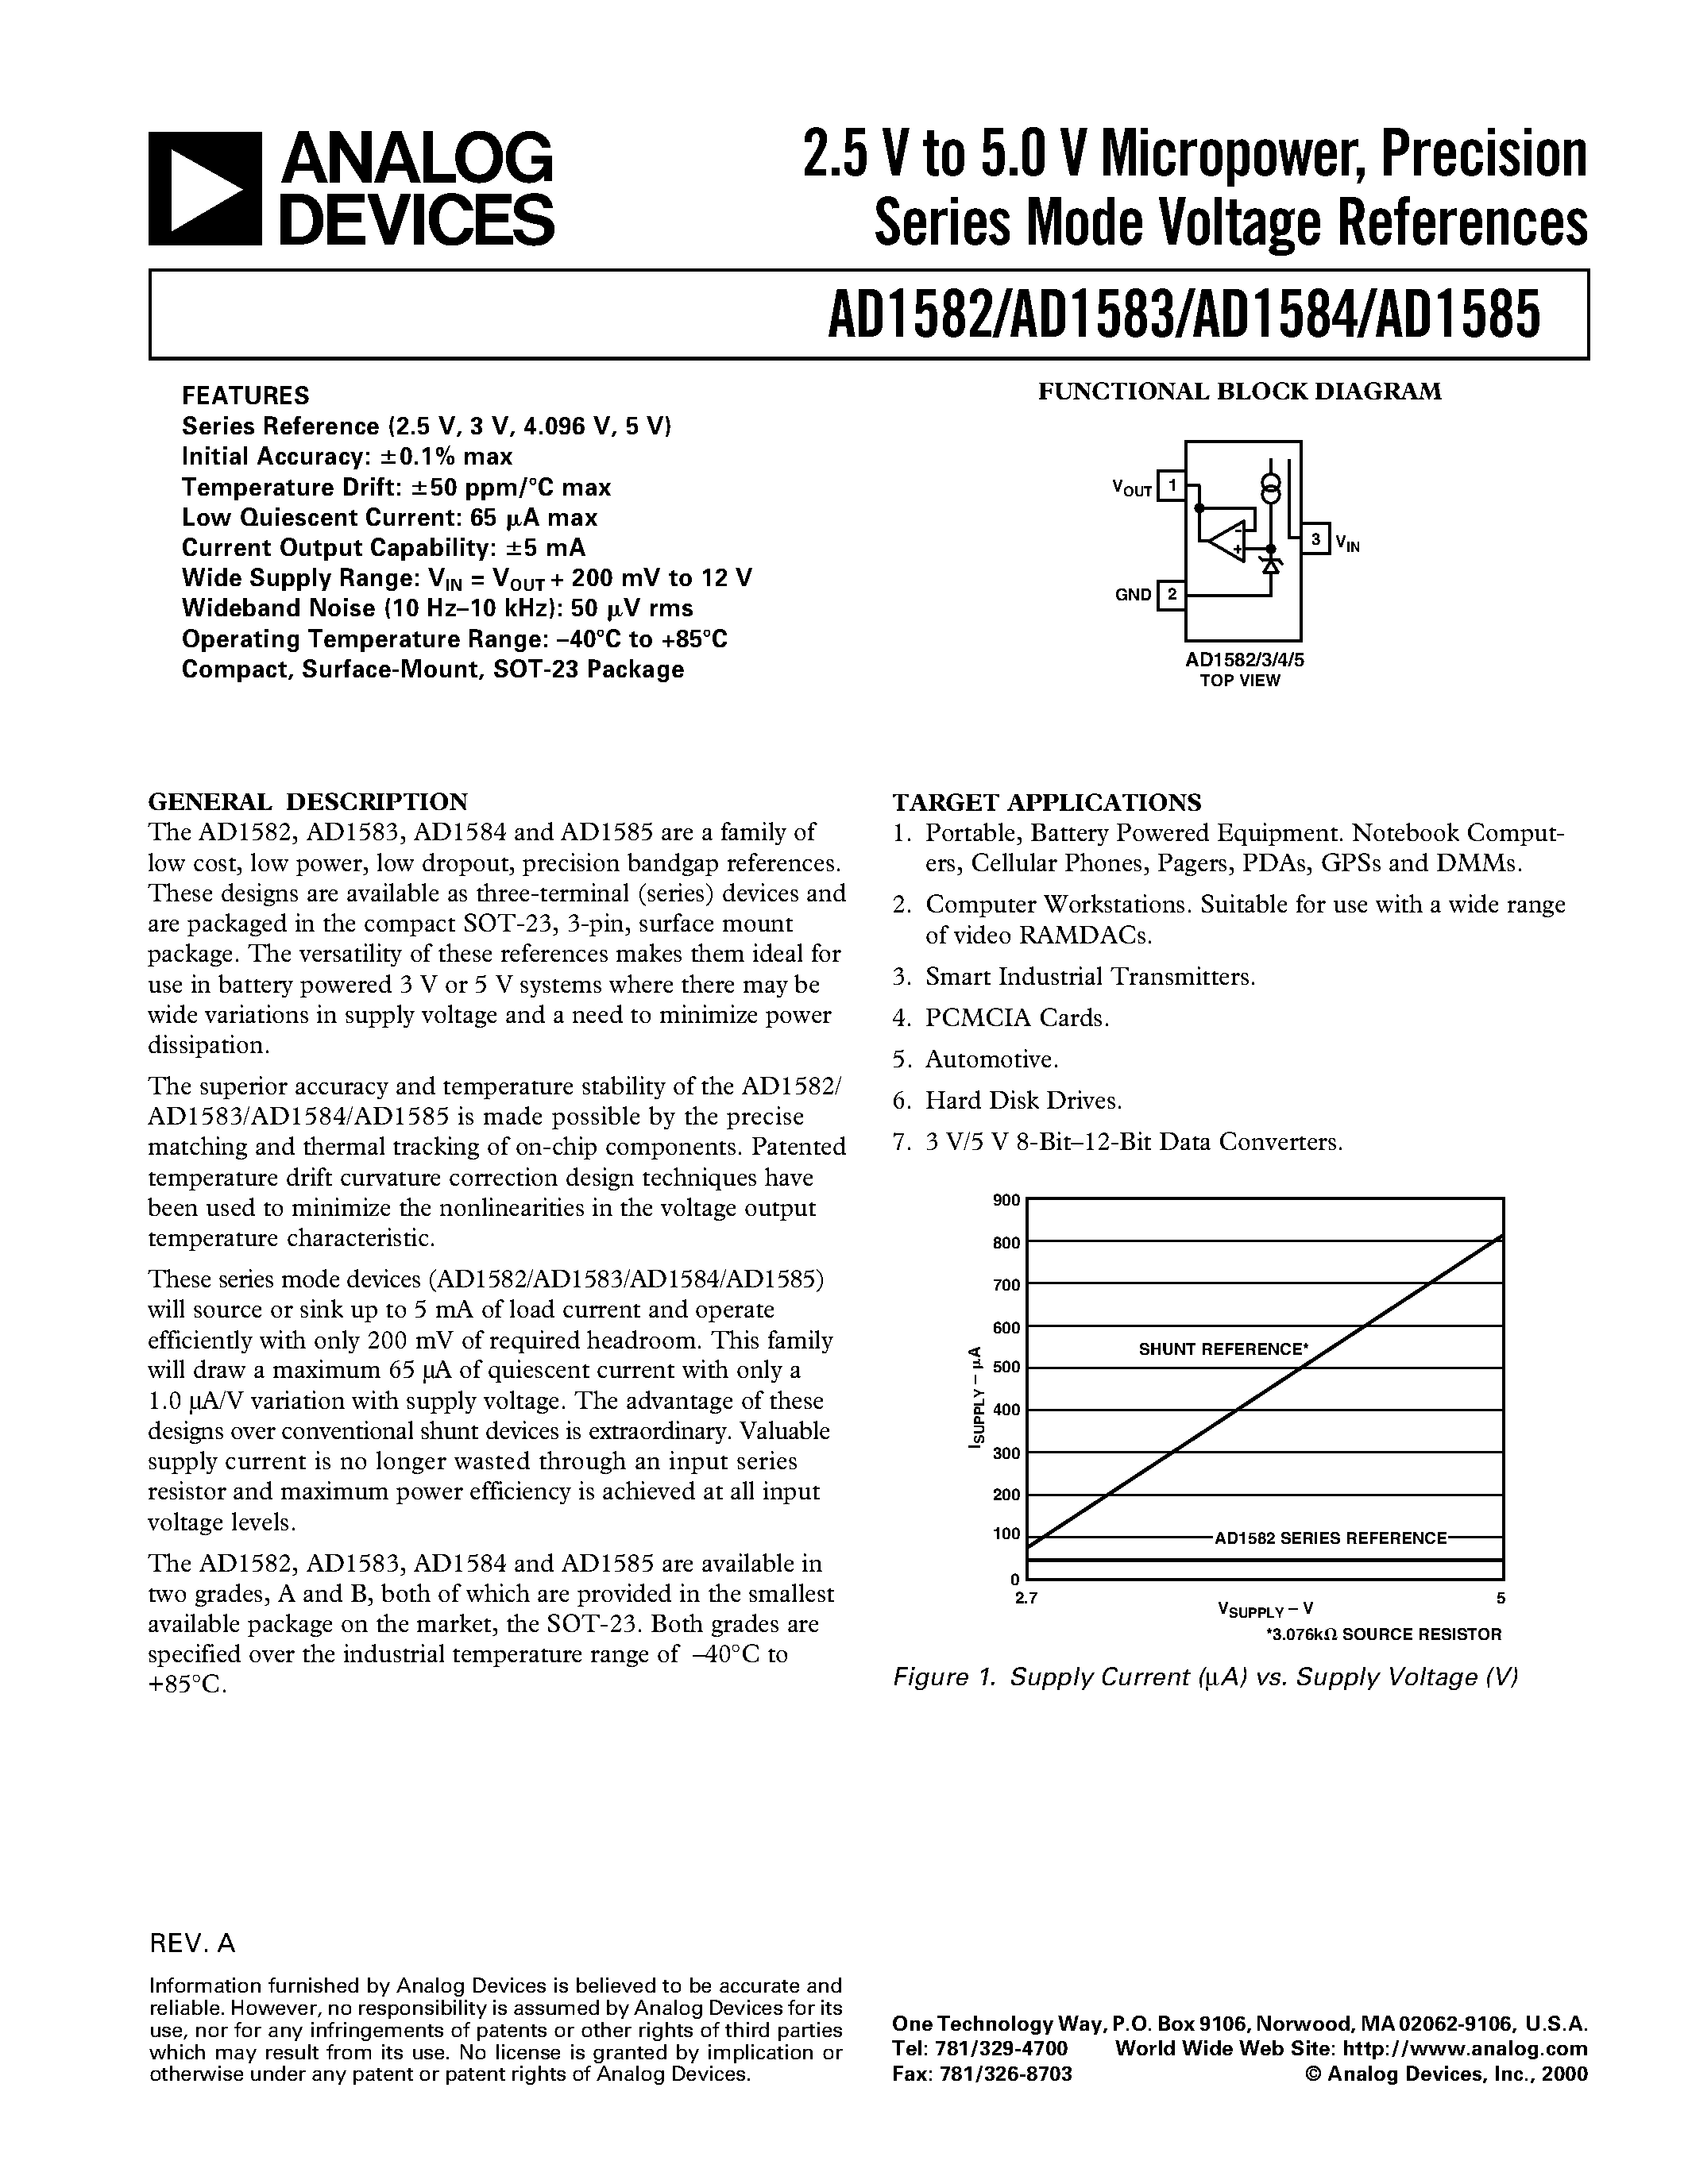 Datasheet AD1585BRT - 2.5 V to 5.0 V Micropower/ Precision Series Mode Voltage References page 1